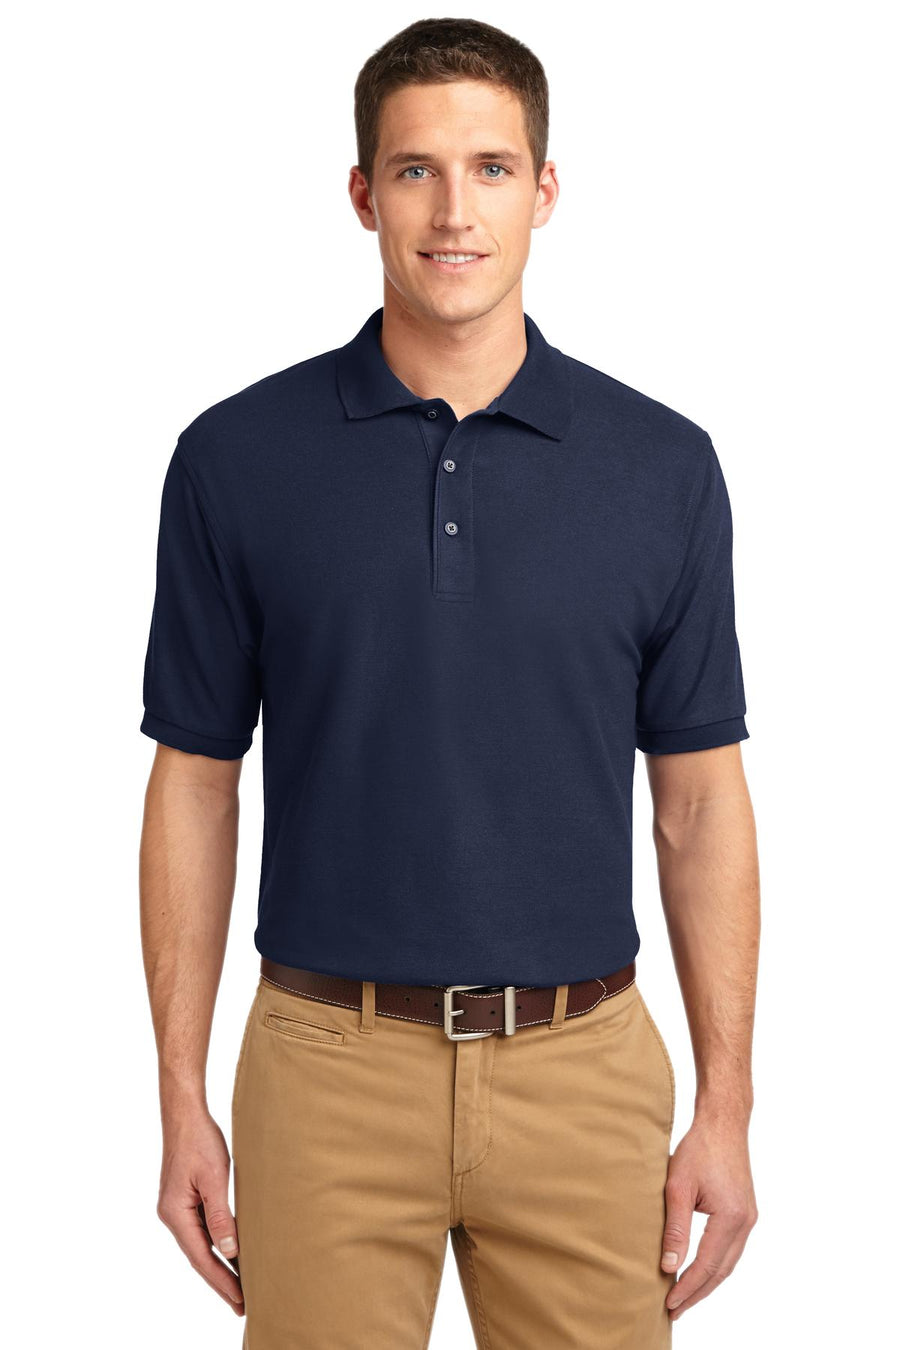 Port Authority Tall Silk Touch Polo.